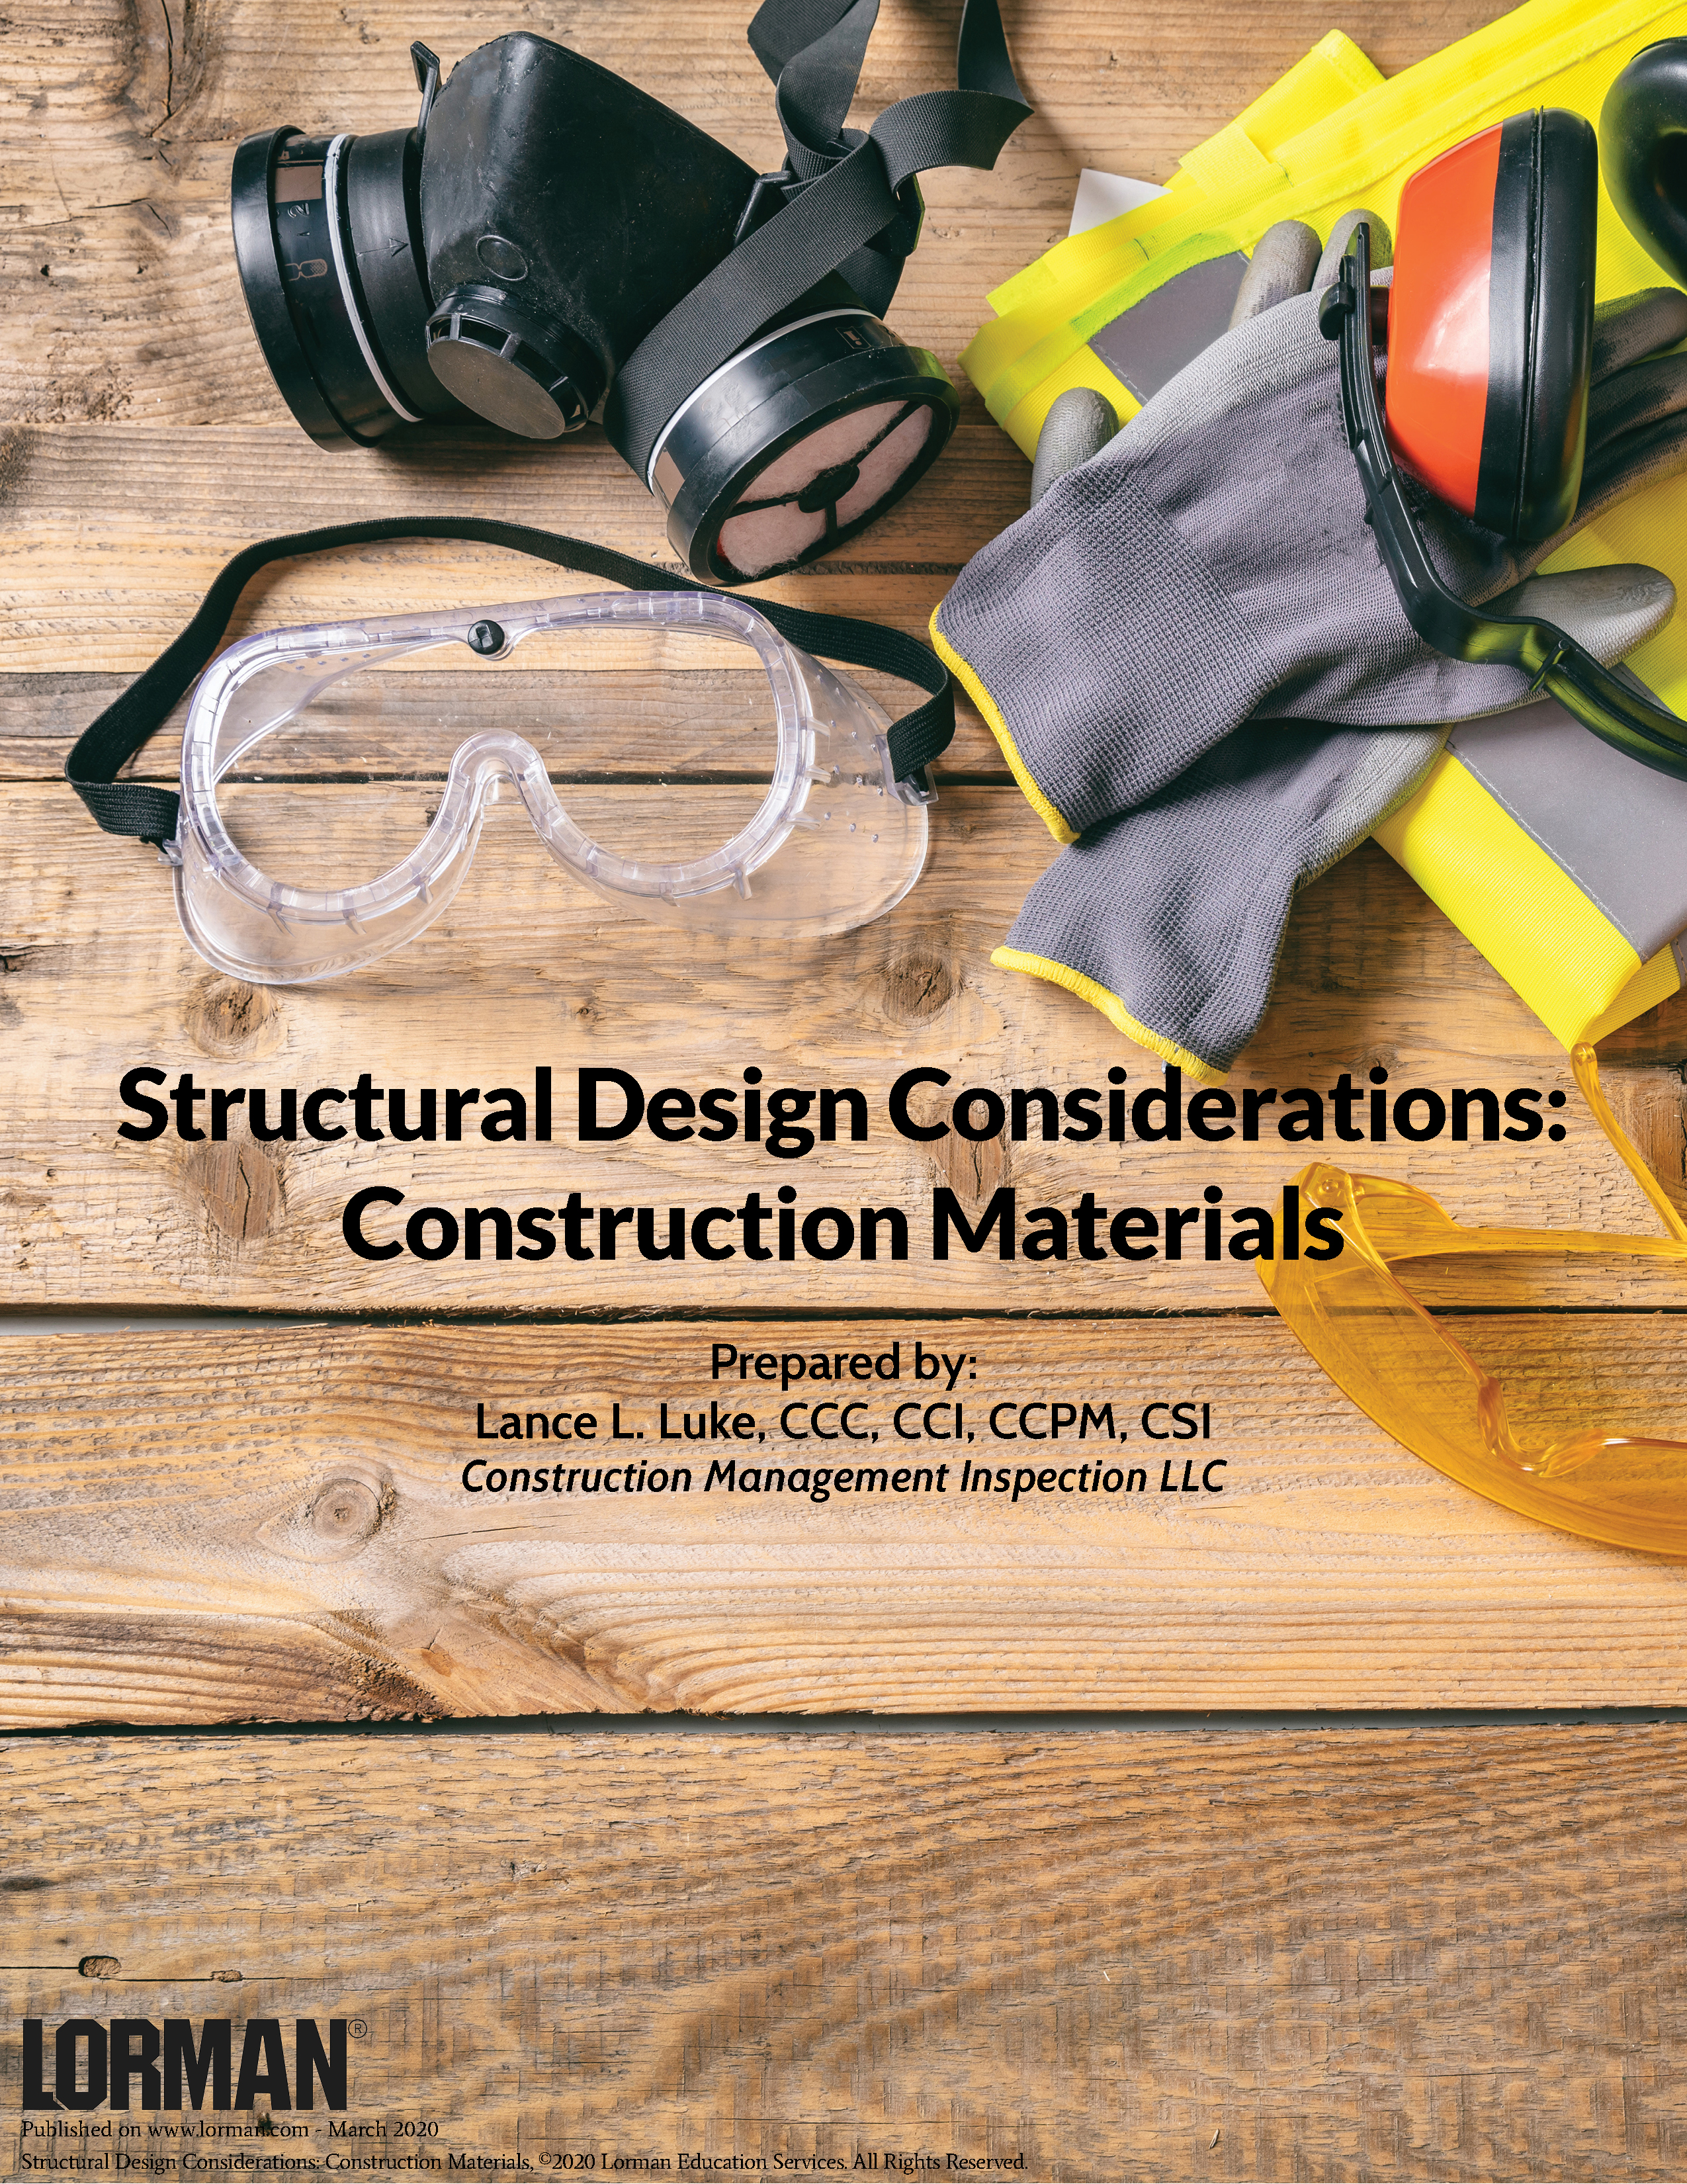 Structural Design Considerations: Construction Materials